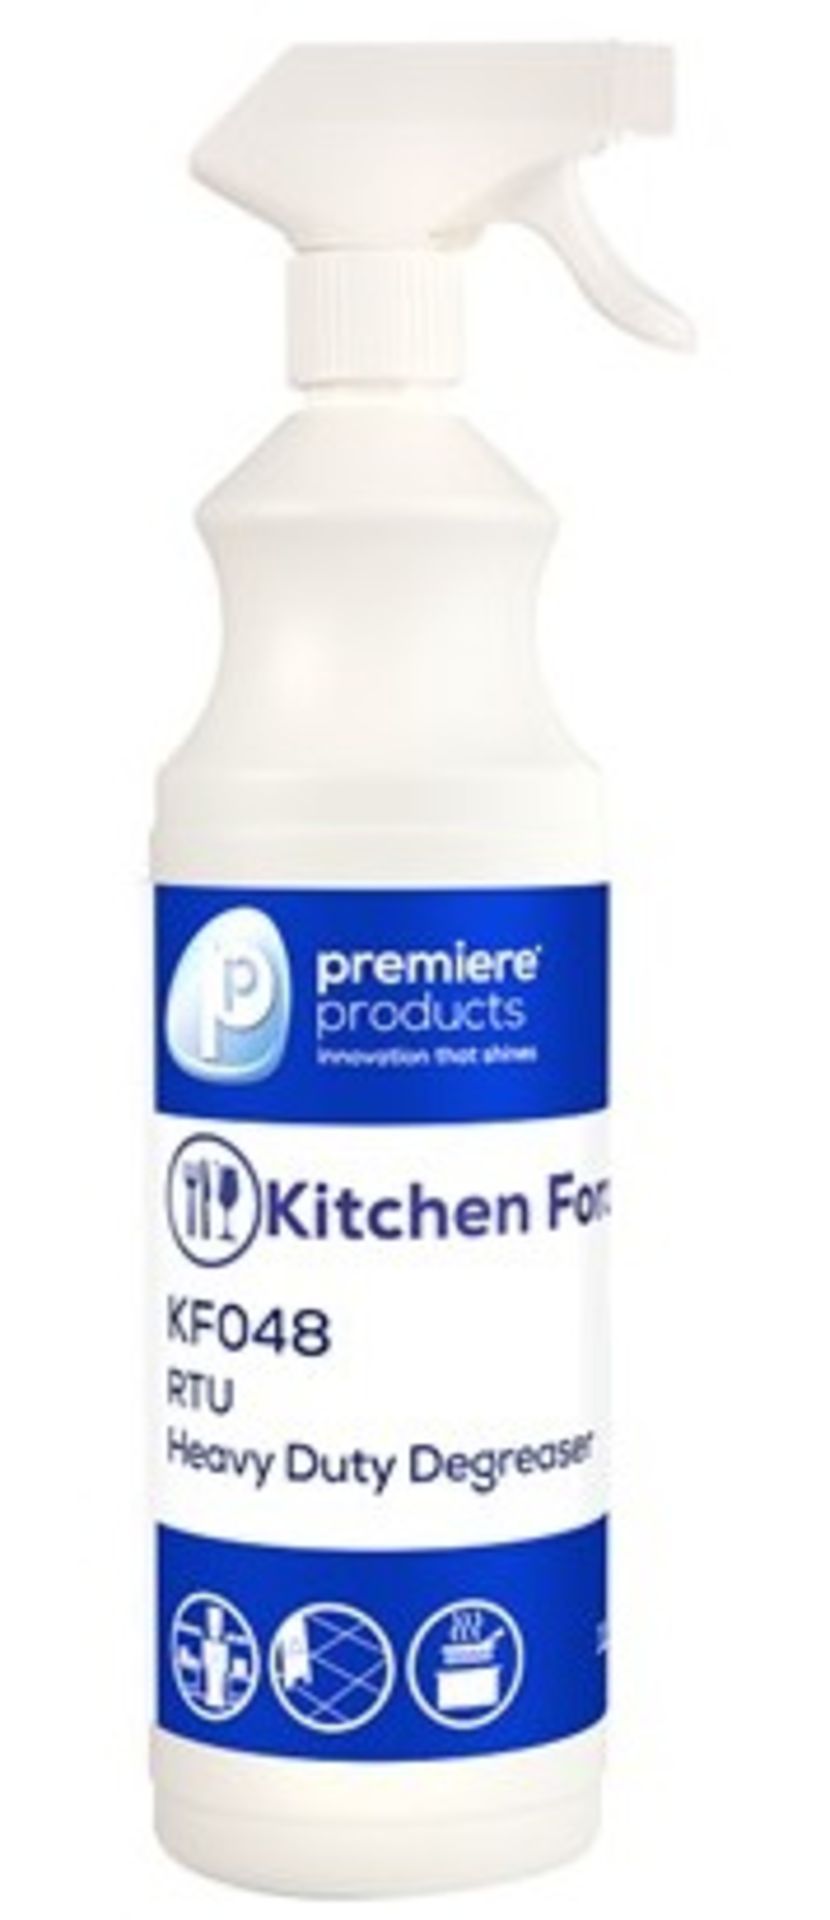 12 x Kitchen Force 1 Litre Ready to Use Heavy Duty Sanitising Degreaser - Premiere Products - Includ